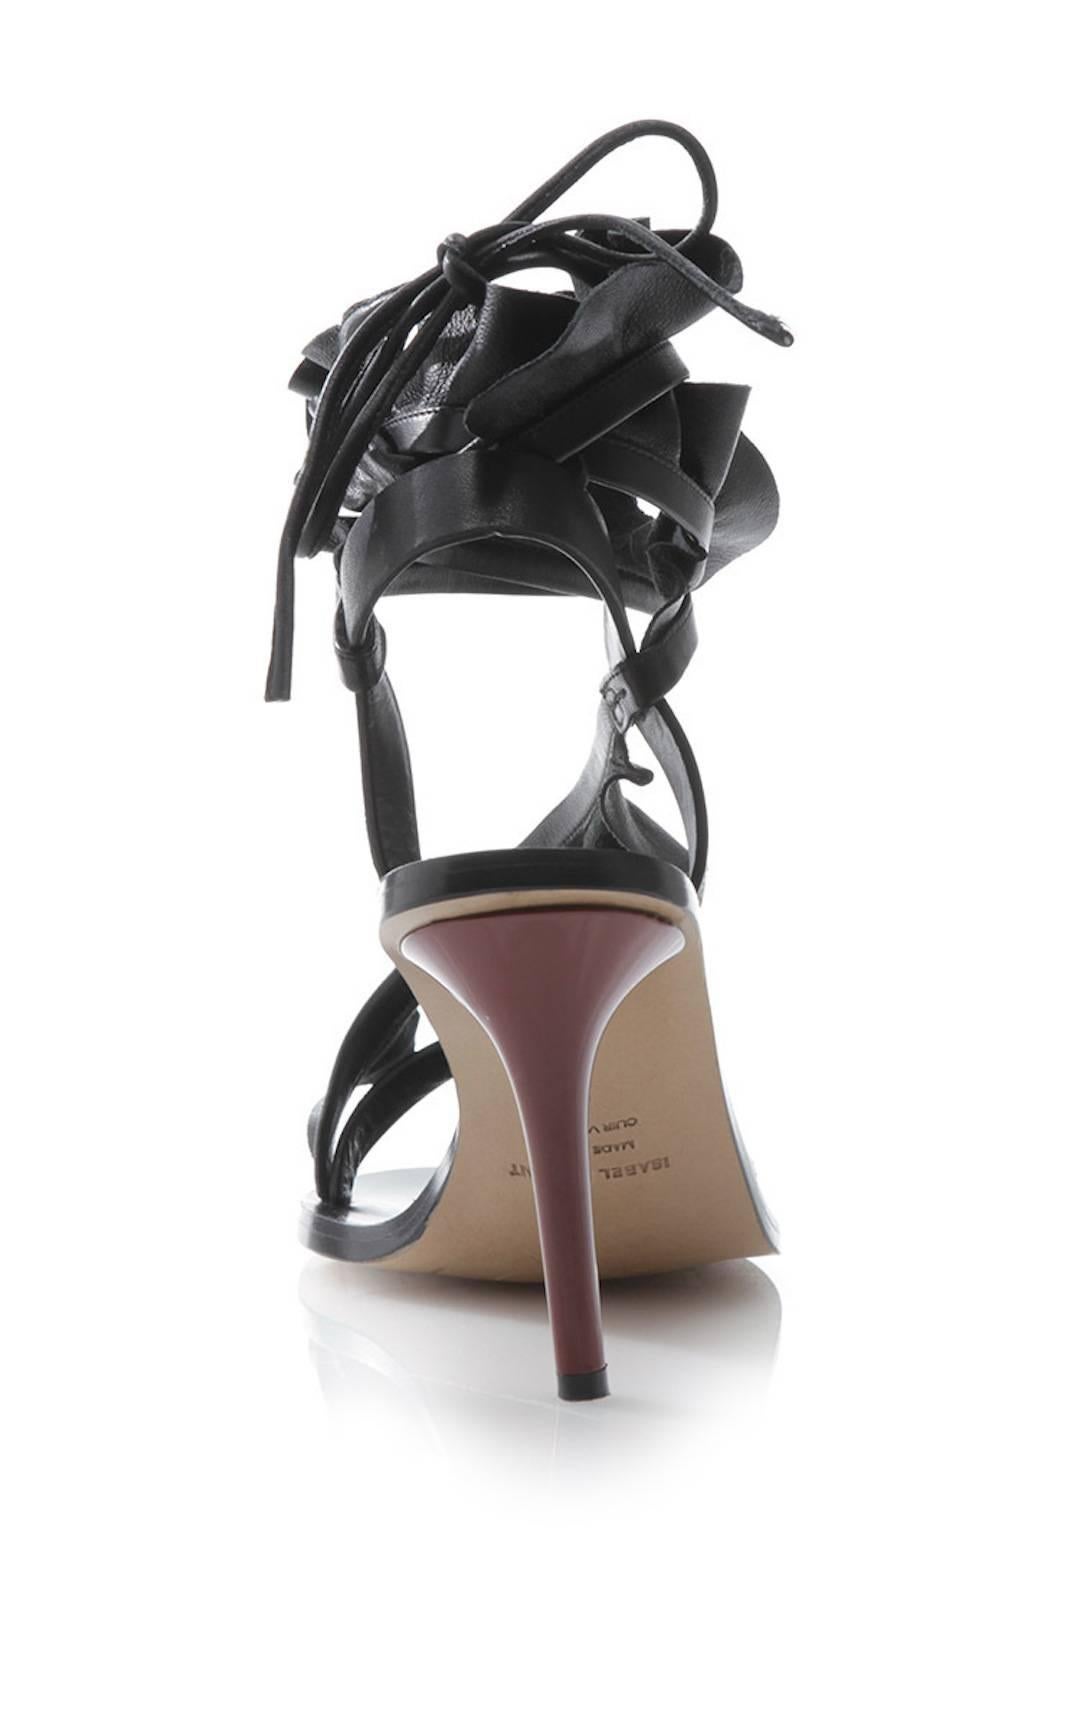 Isabel Marant New Sold Out Runway Black Leather Wraparound Sandals Heels in Box 2